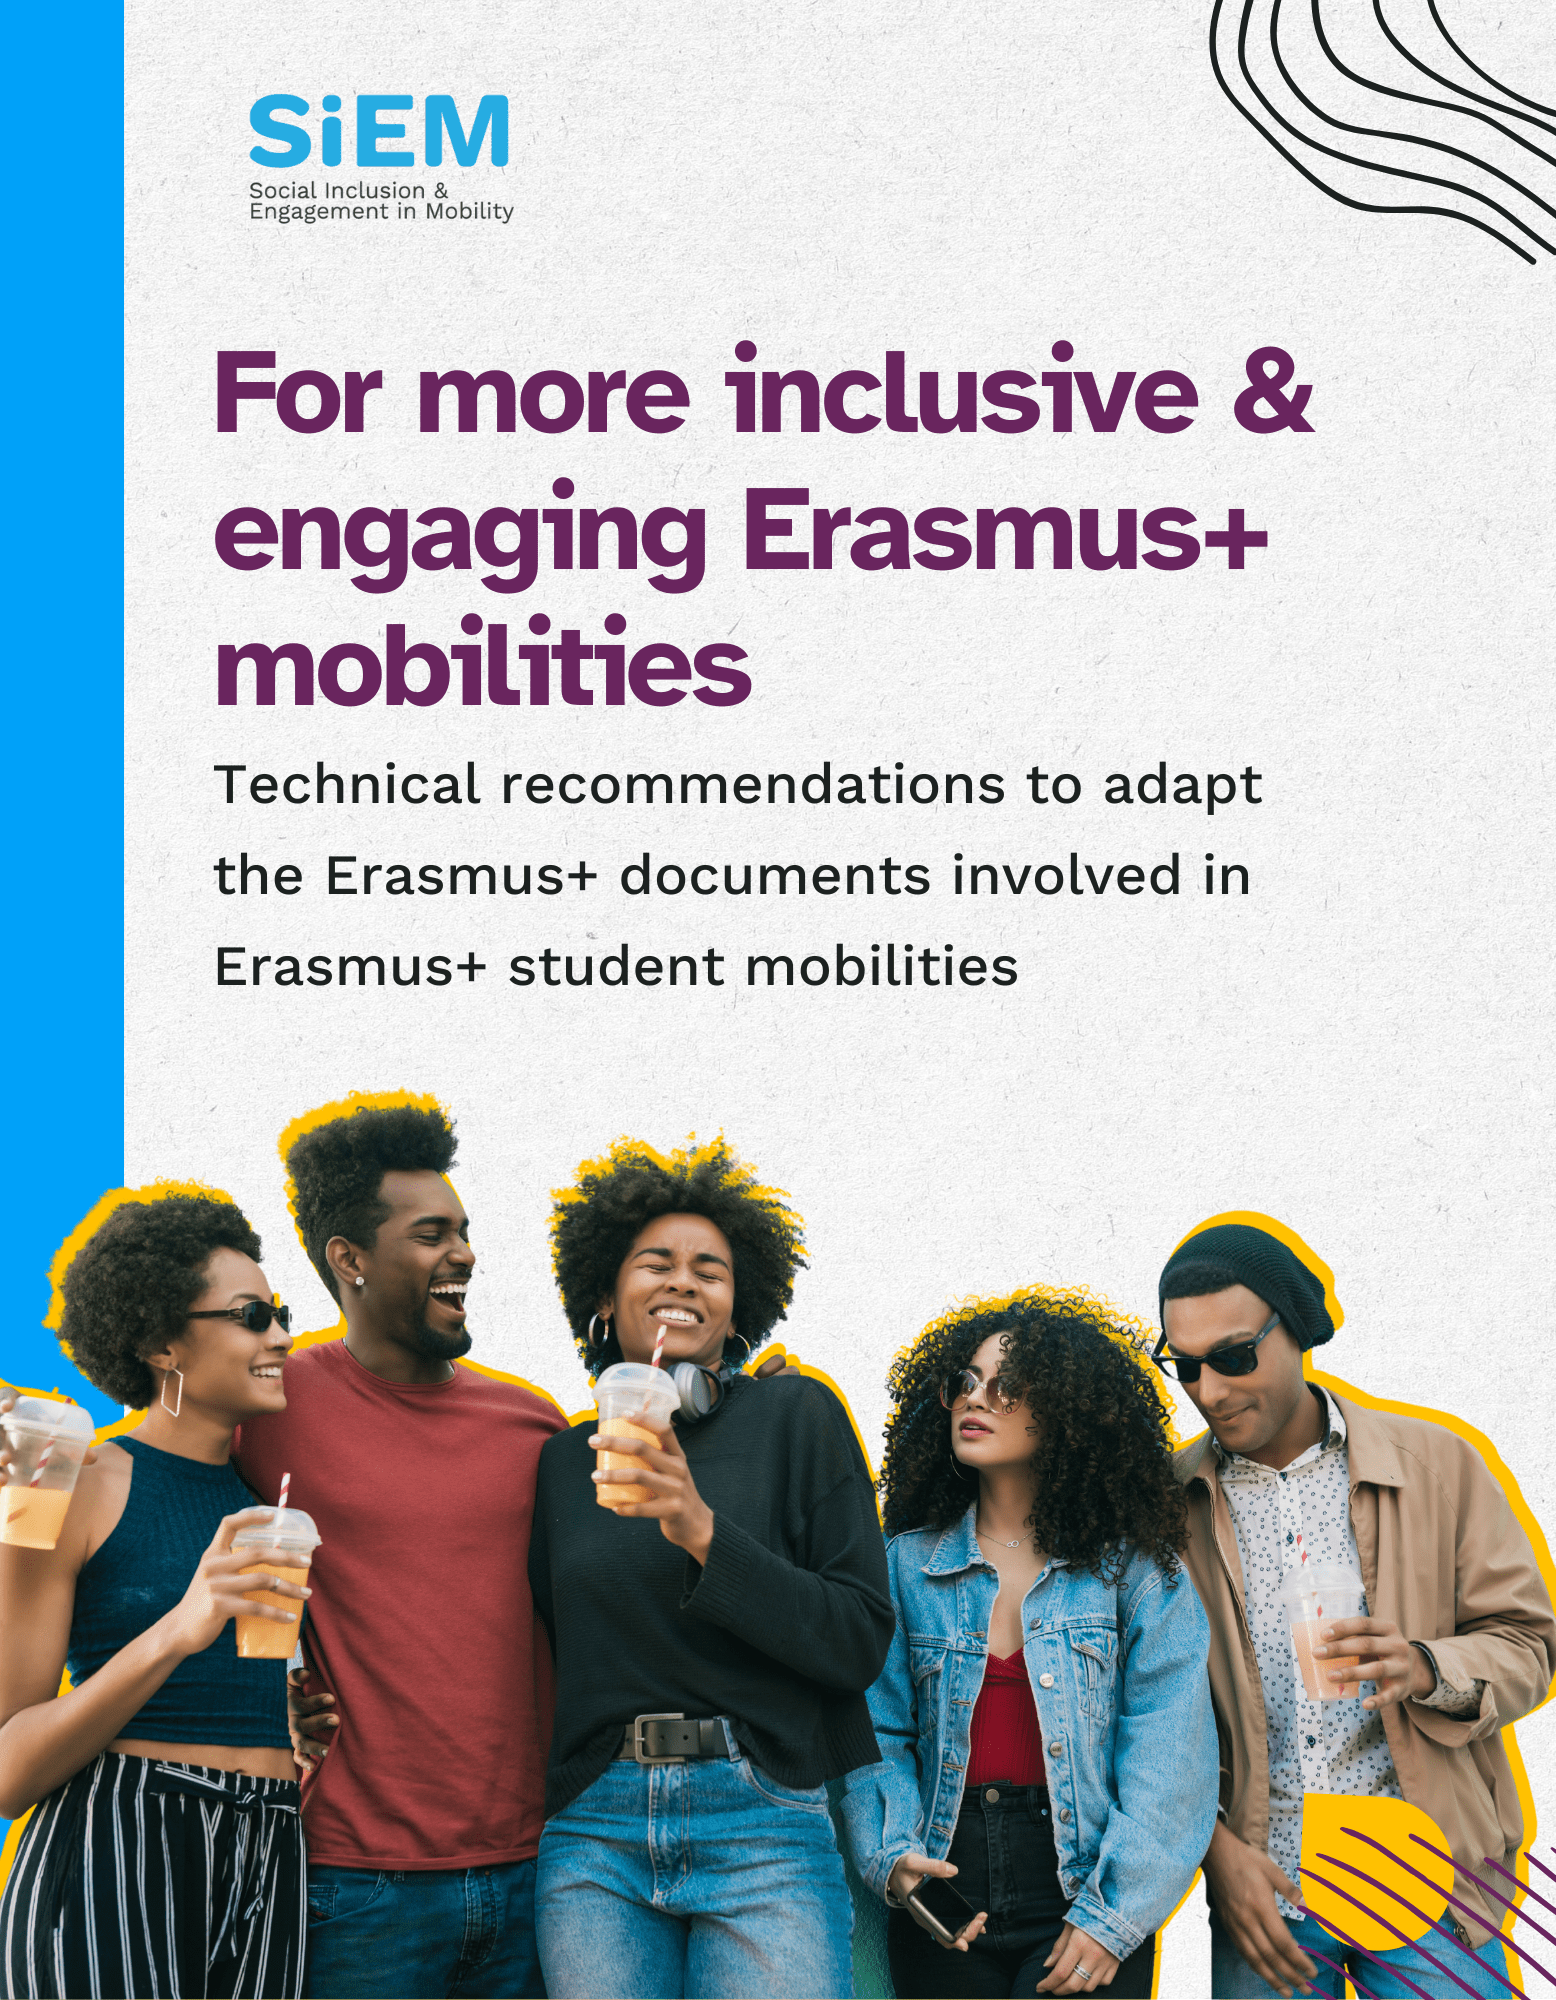 For more inclusive & engaging Erasmus+ mobilities